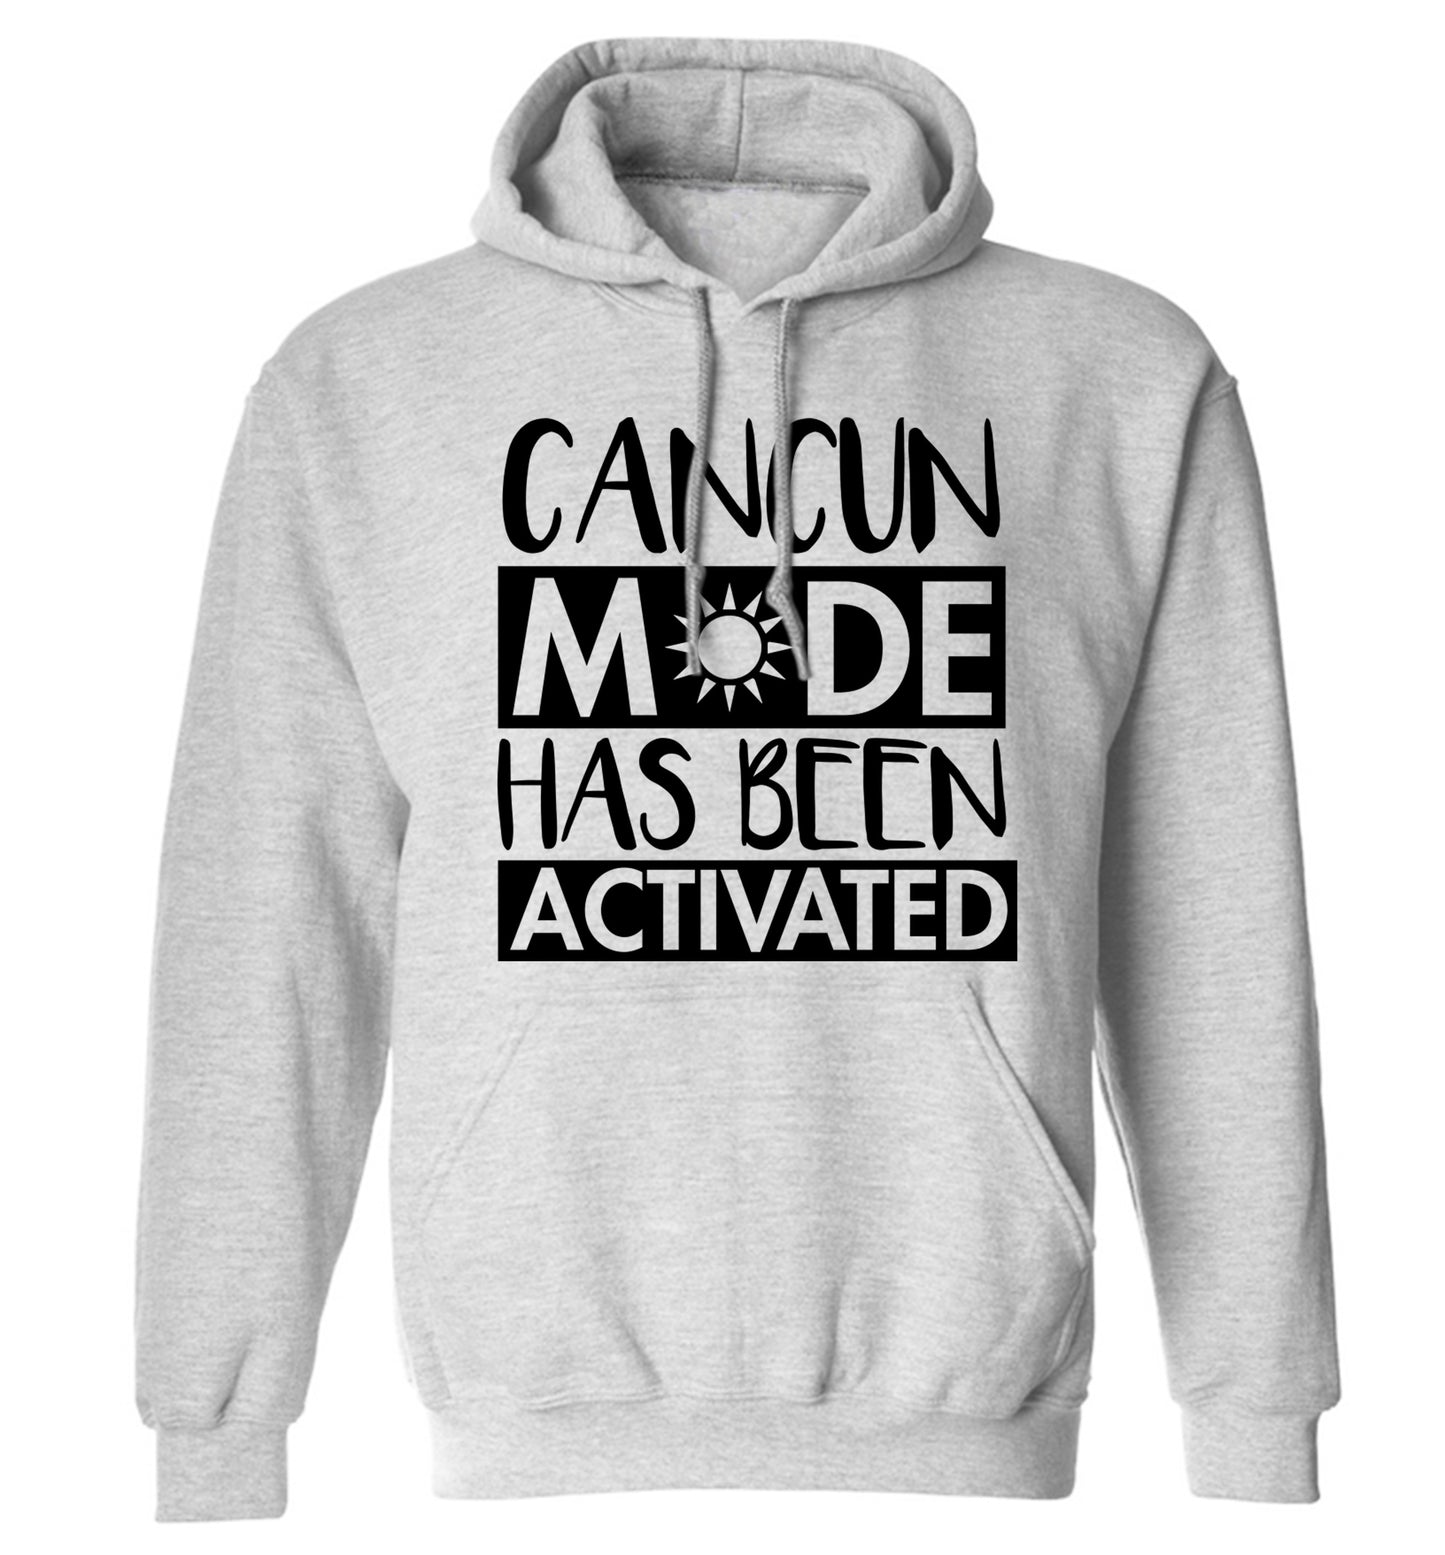 Cancun mode has been activated adults unisex grey hoodie 2XL